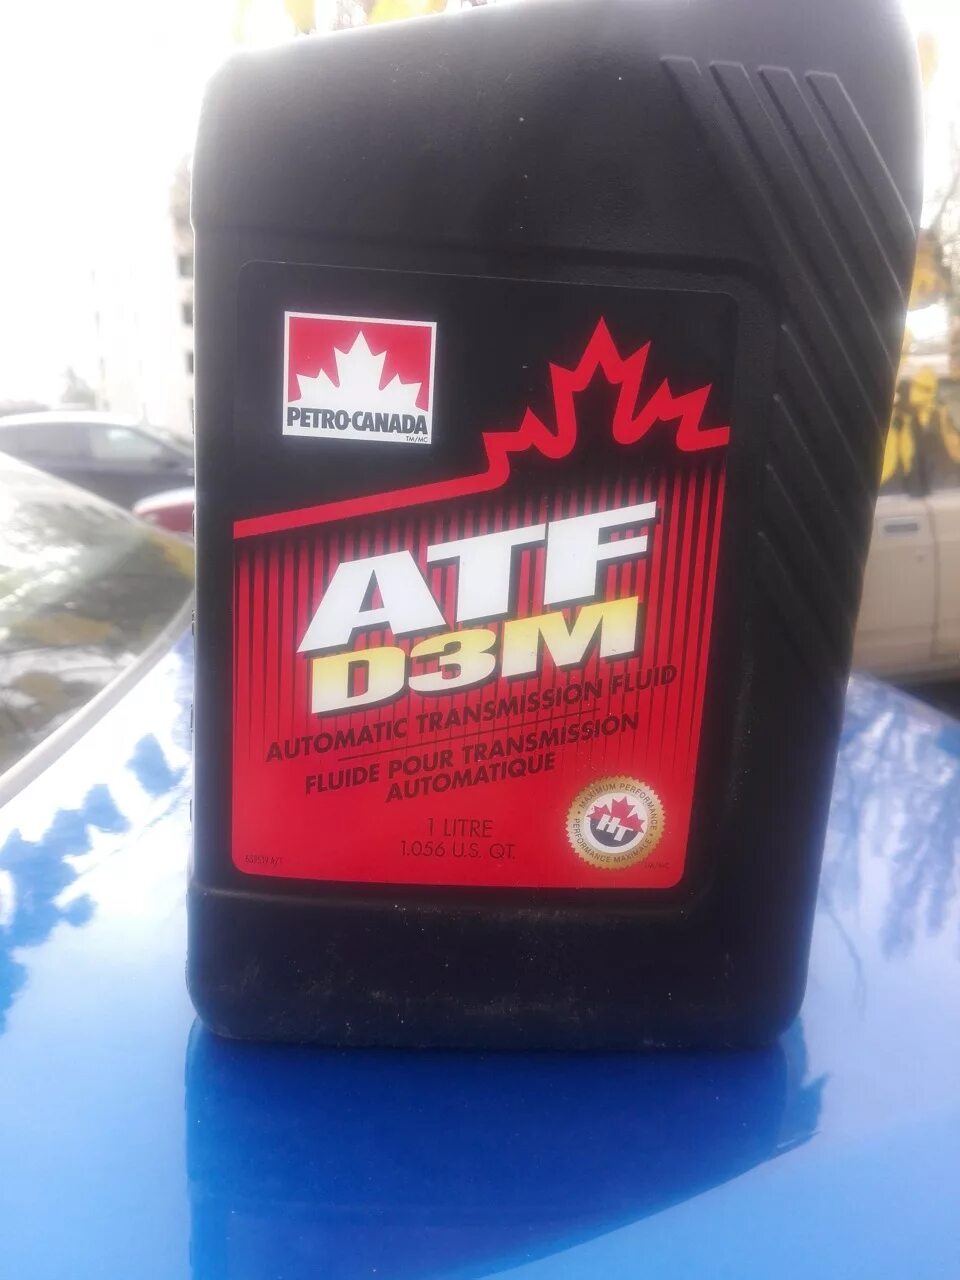 Масло Petro Canada ATF d3m. Петро Канада декстрон 3. Petro-Canada ATF d3m Прадо 95. ГУР Петро Канада жидкость.